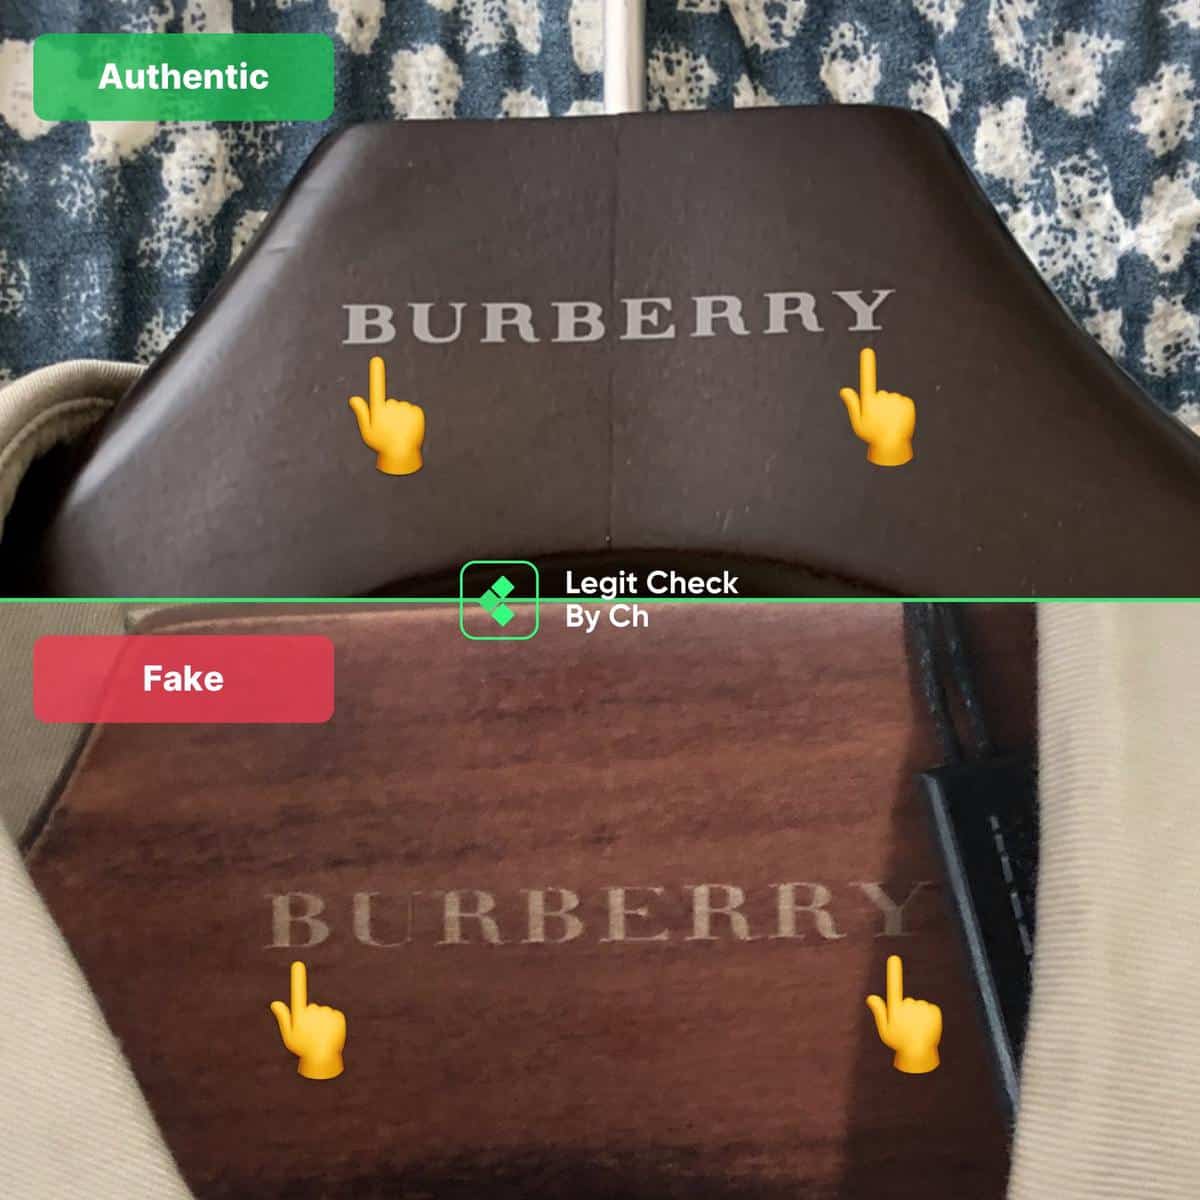 How To Spot Fake Burberry Coats In 2021 - Fake Real Burberry Trench Coat Guide - By Ch